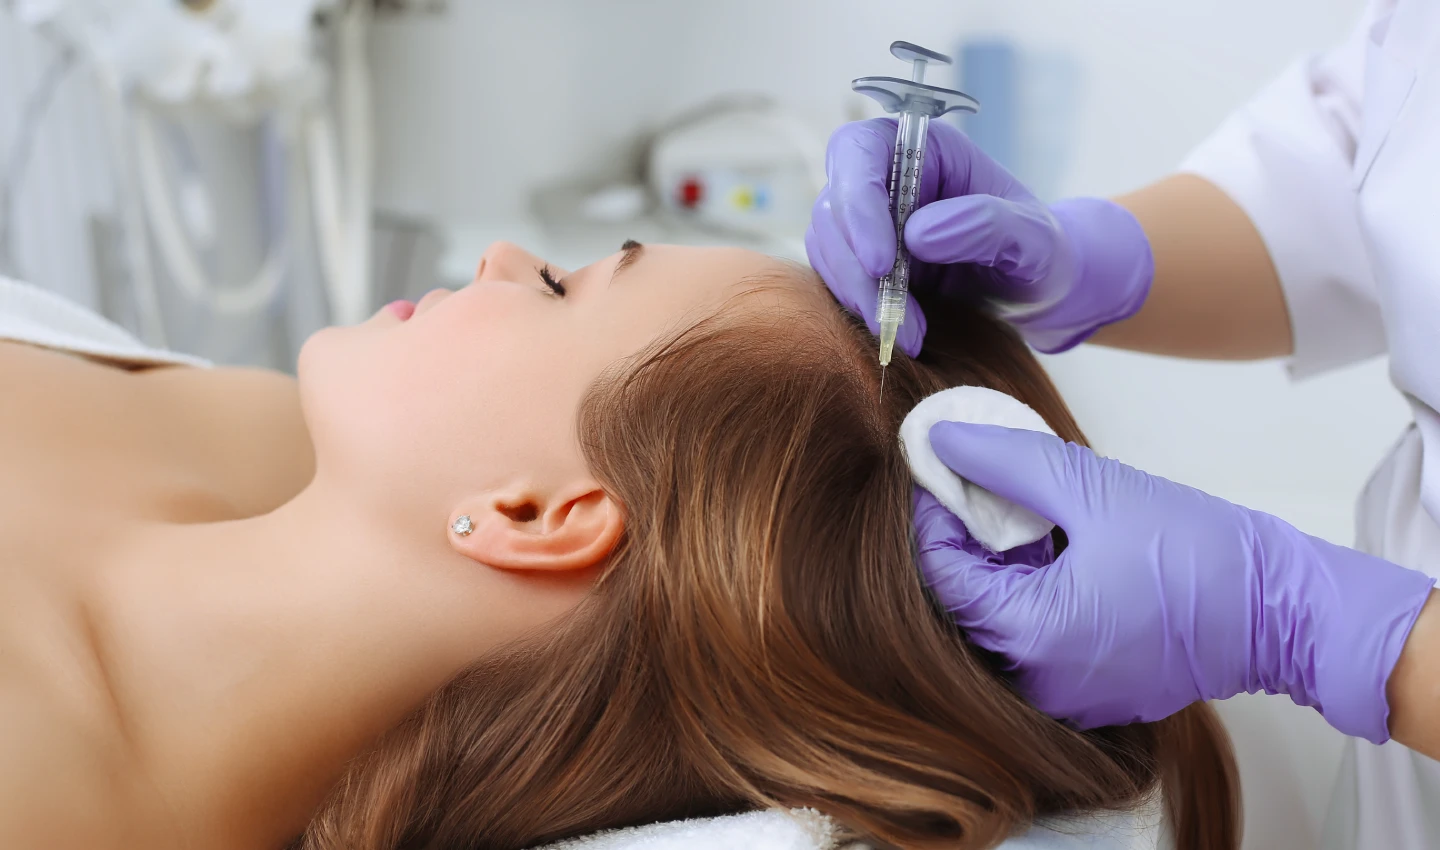 A person receiving a microneedling injection in her hair as part of a hair transplant procedure, demonstrating the benefits of combining microneedling and hair transplant surgery for thick, luscious locks.